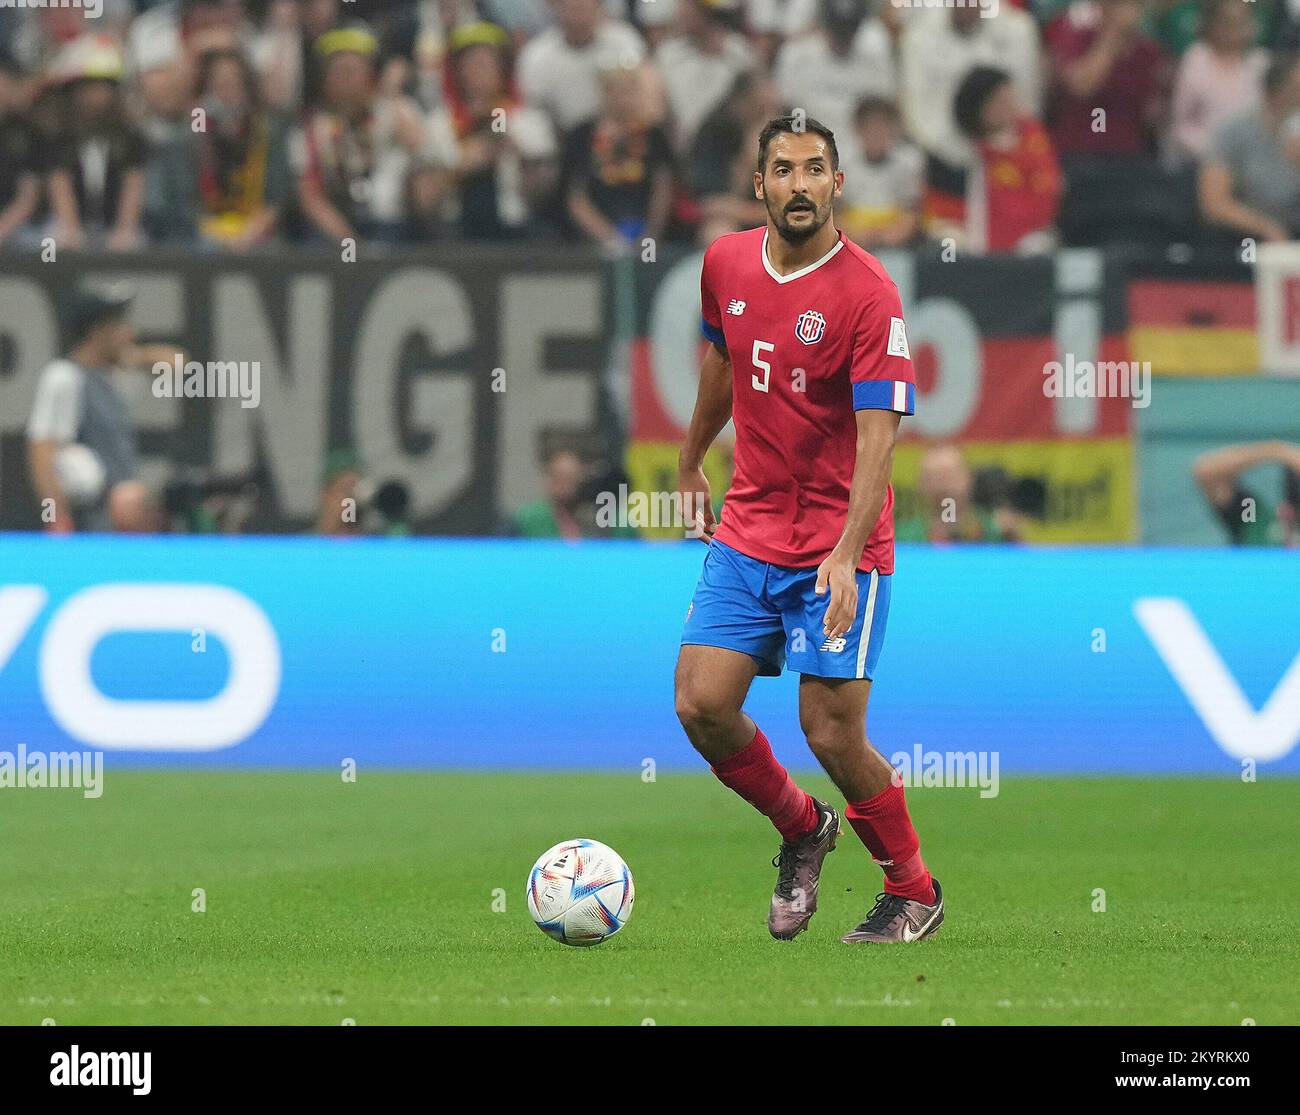 Al Bayt Stadium, Doha, QAT, December 1st, 2022, December 1st, 2022, Al Bayt Stadium, Doha, QAT, World Cup FIFA 2022, Group E, Costa Rica vs Germany, in the picture Costa Rica's midfielder Celso Borges Stock Photo